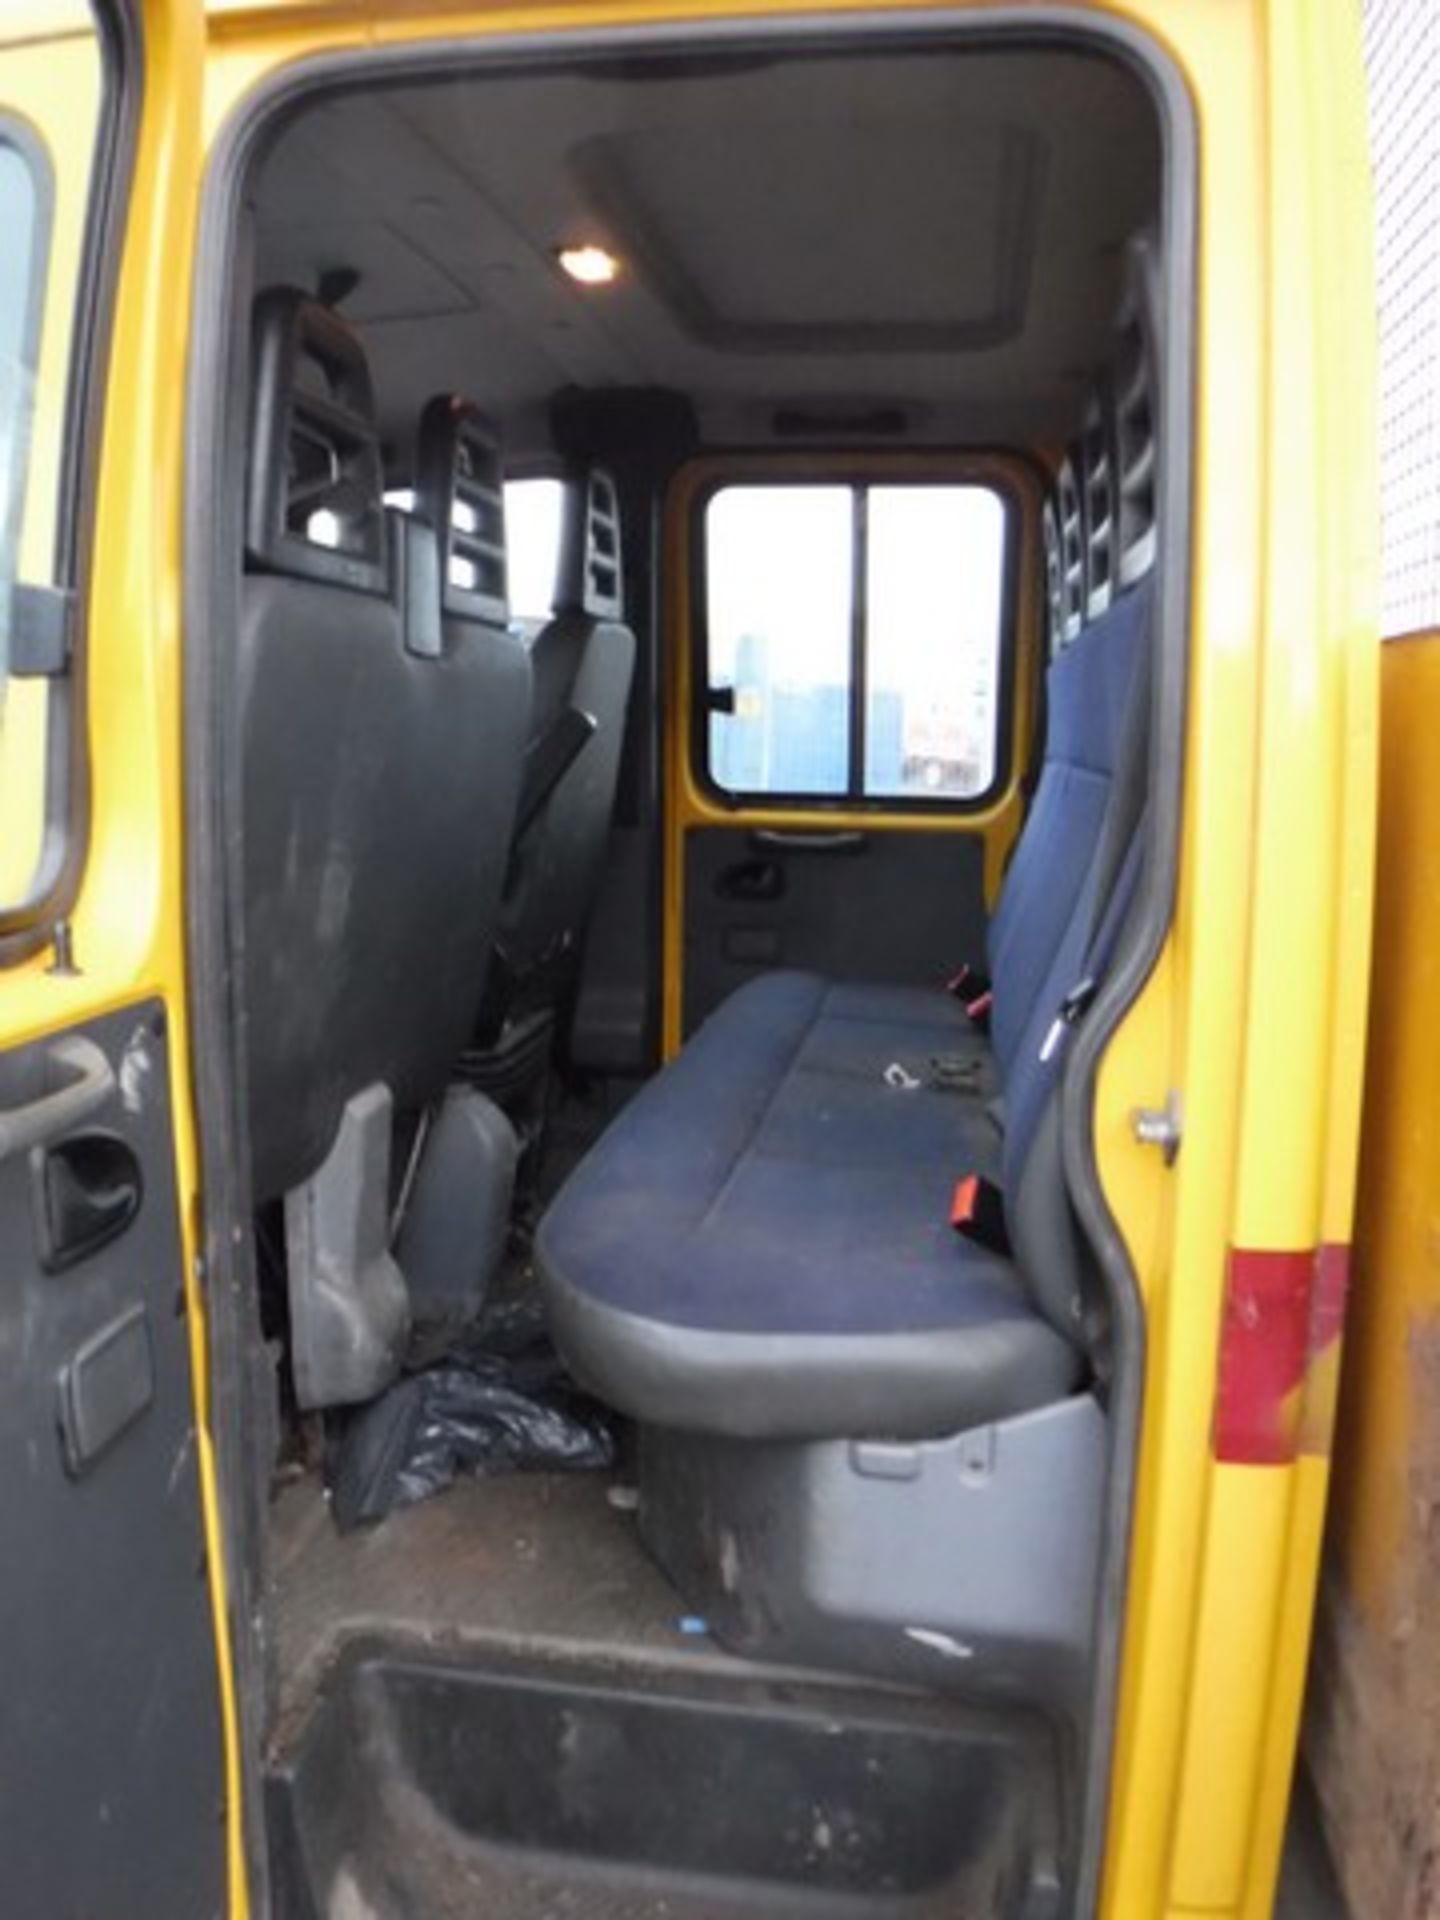 IVECO DAILY 65C18 - 2998cc - Image 6 of 11